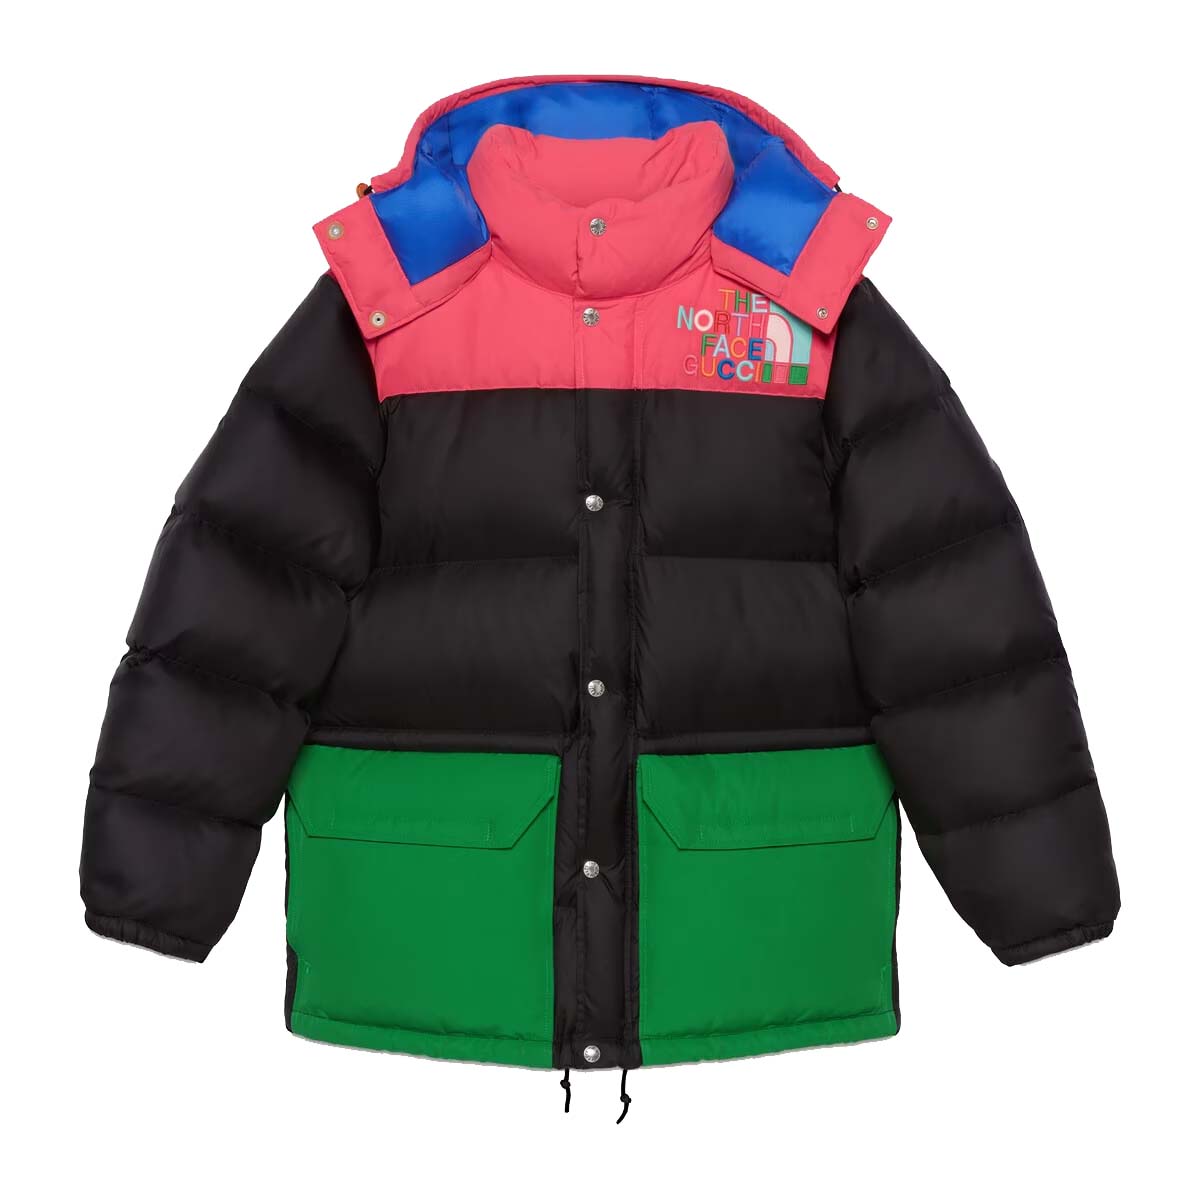 Gucci x The North Face Down Jacket Black/Multicolor - FW22 - US